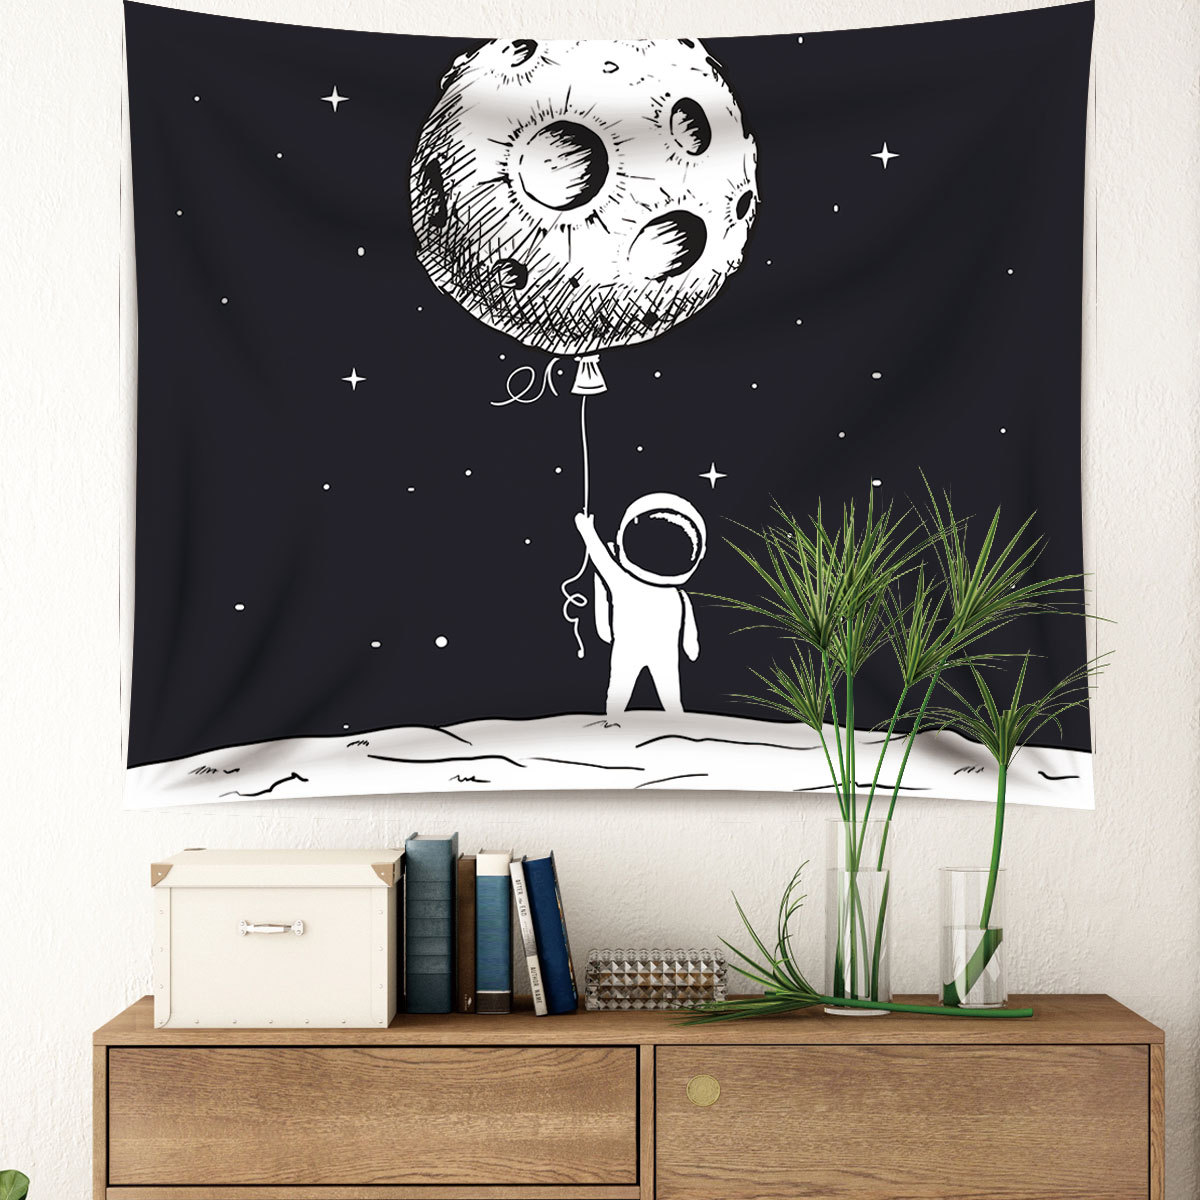 Spaceman-Series-Background-Cloth-Hanging-Cloth-Tapestry-Room-Cloth-Painting-Decoration-1751927-1